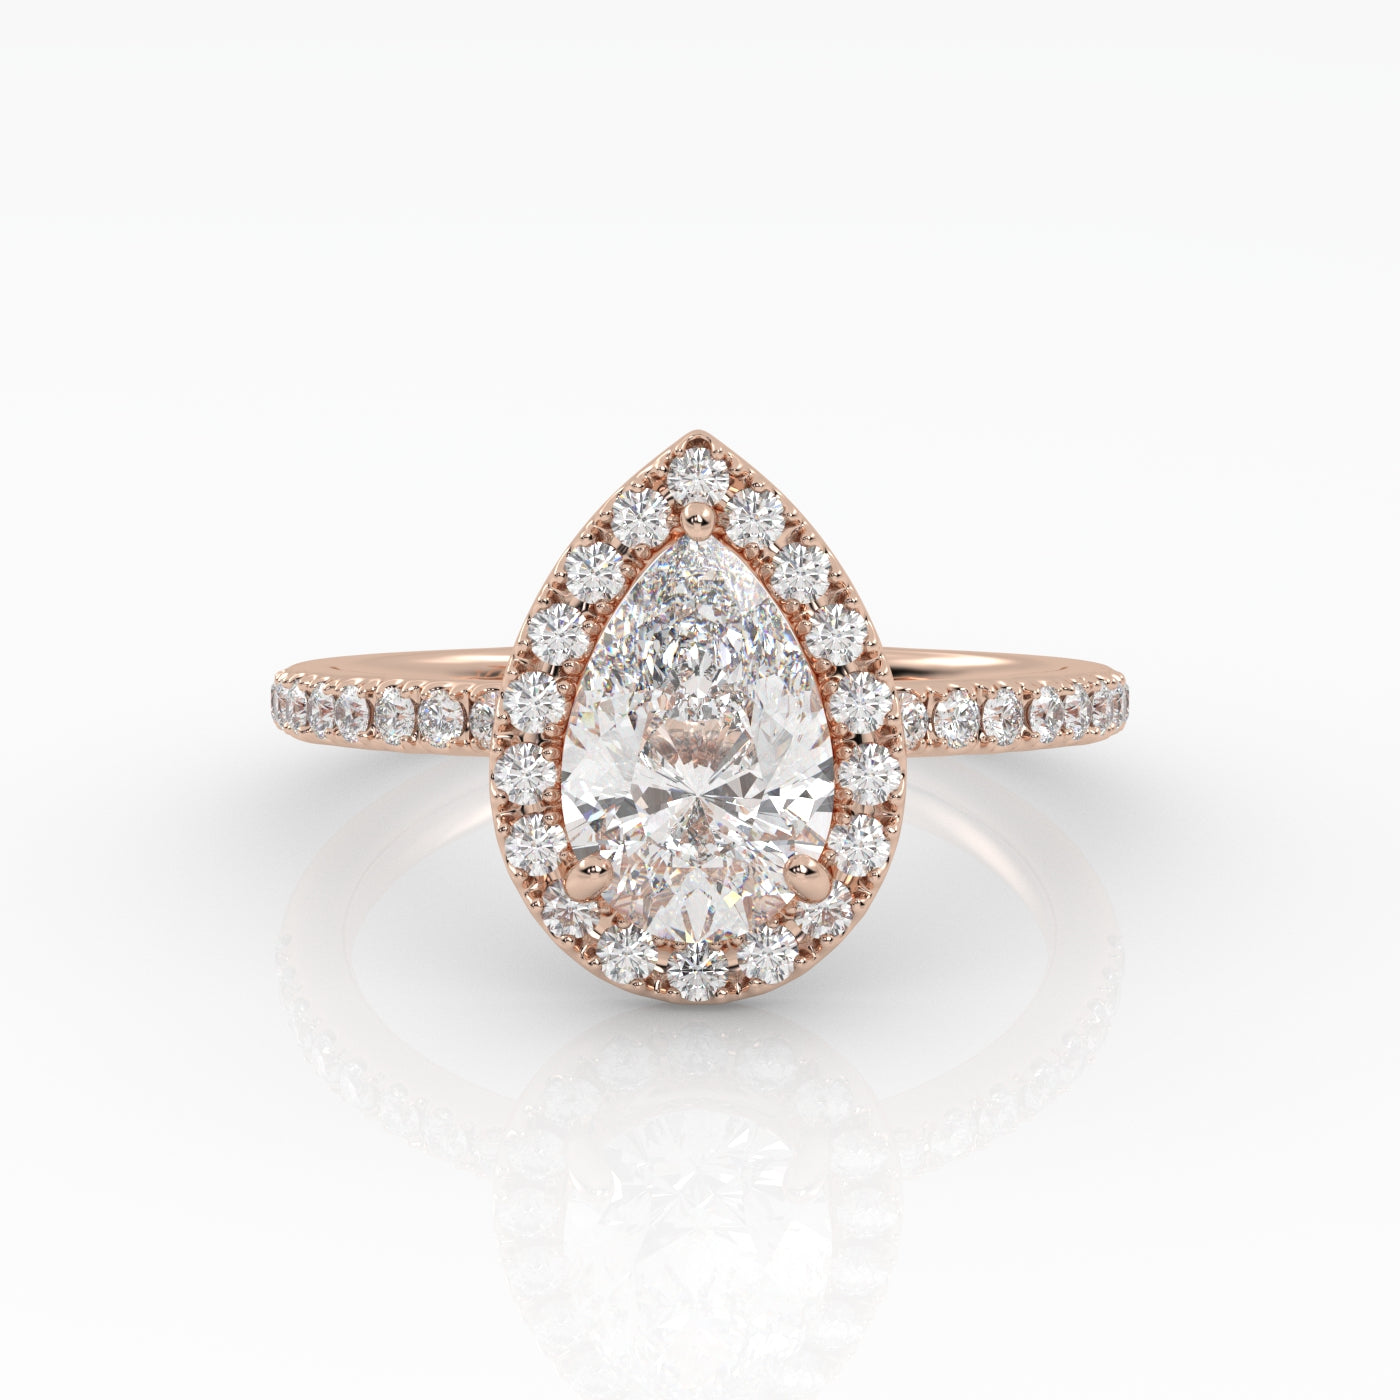 The Pear Solitaire with Pavé band and Halo